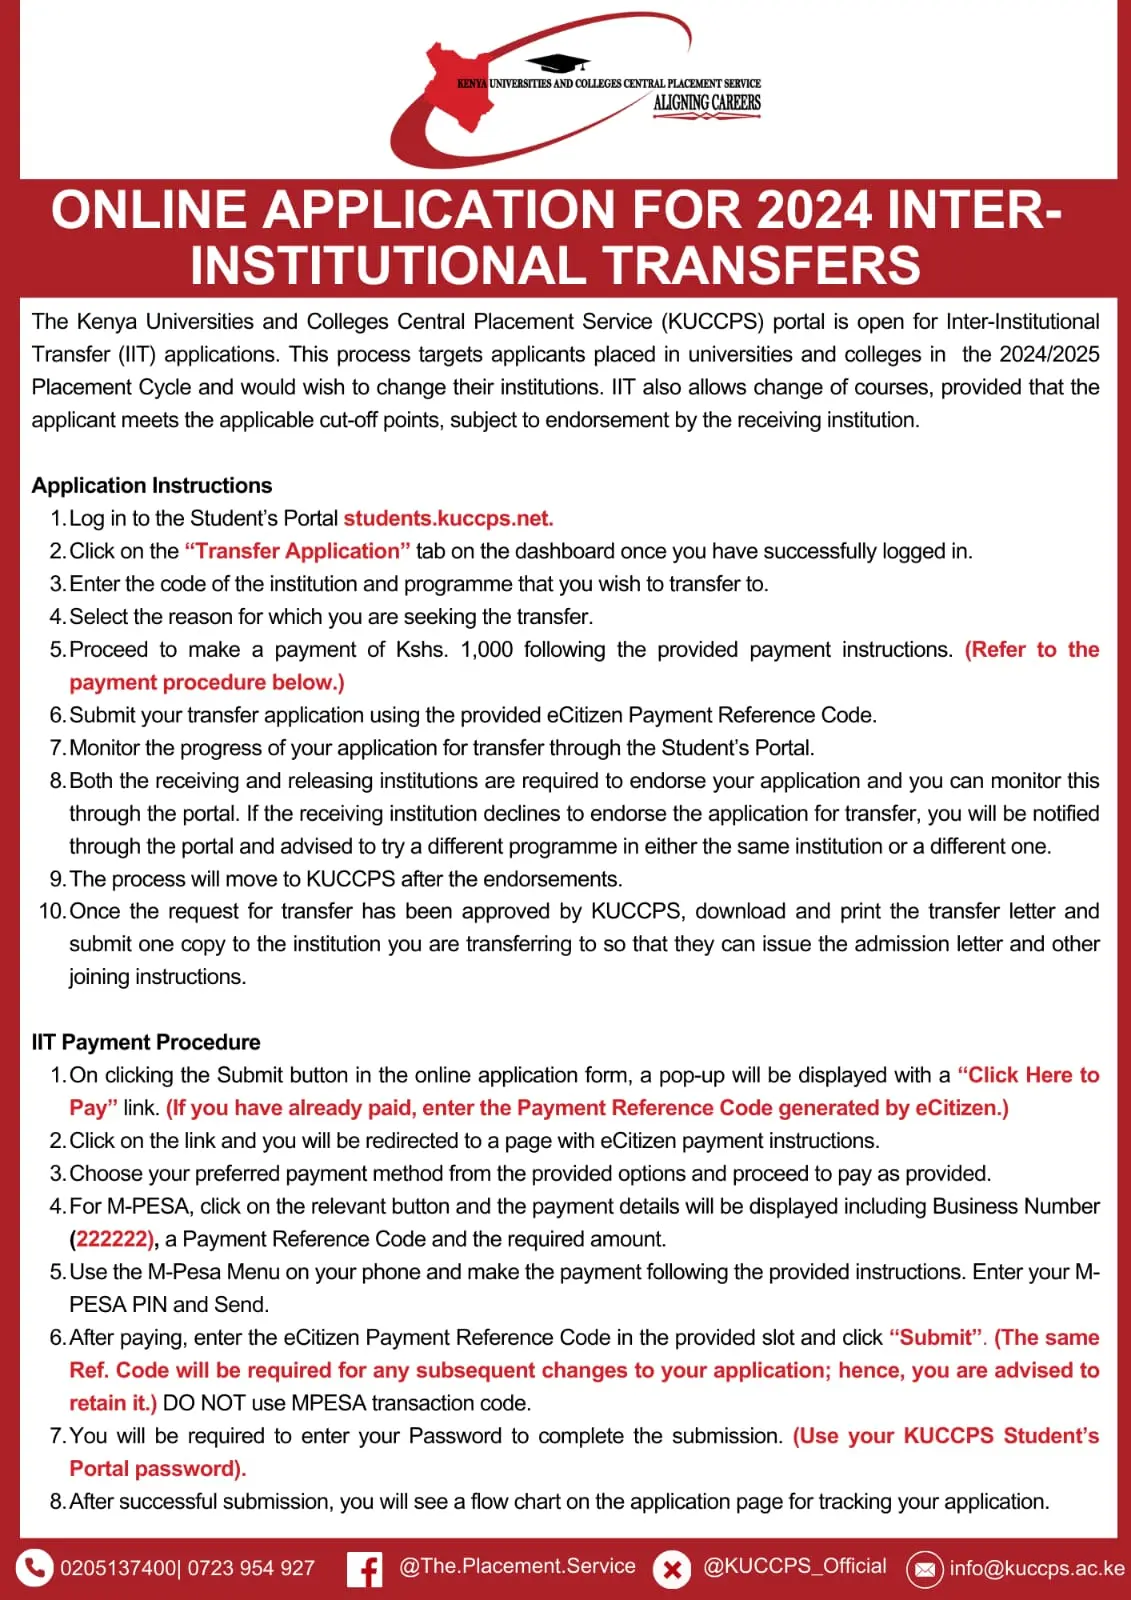 KUCCPS opens inter-institution transfers